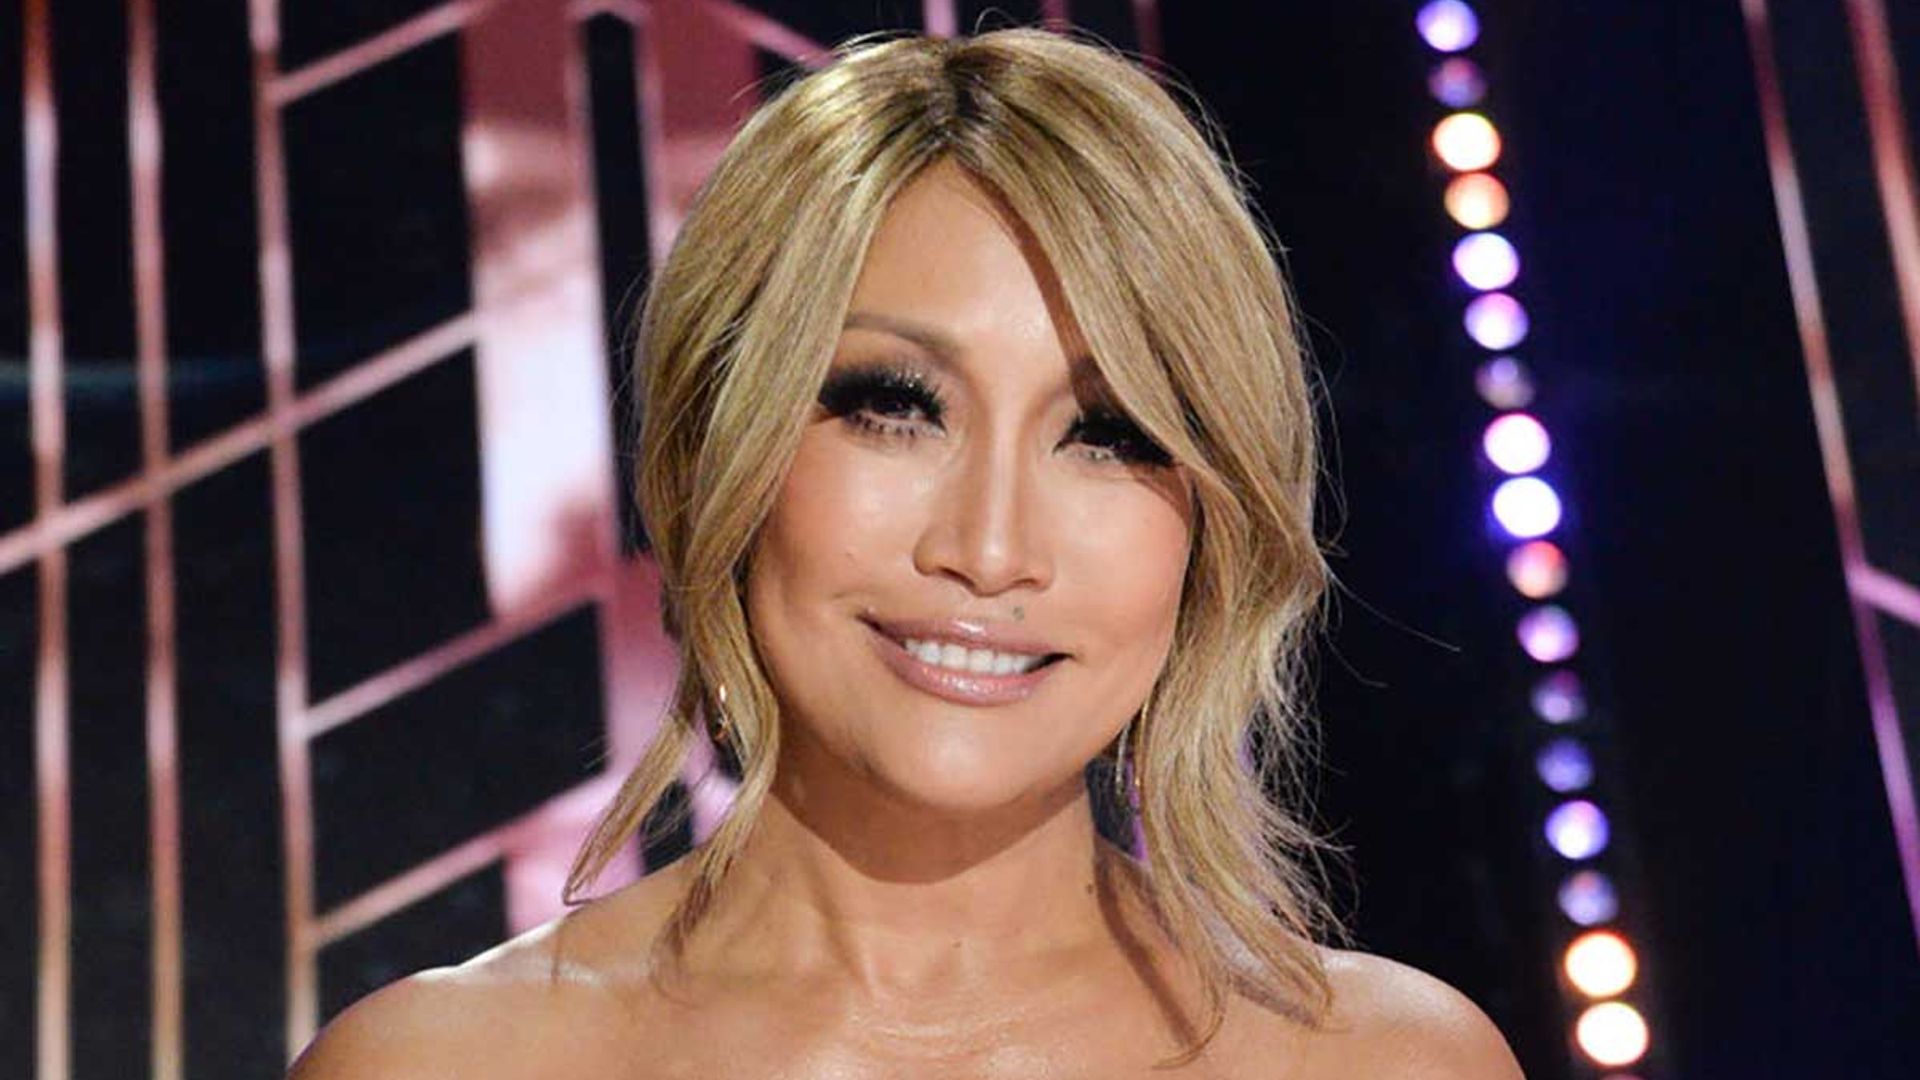 Carrie Ann Inaba has never looked better as she opens up about her body confidence ahead of DWTS finals